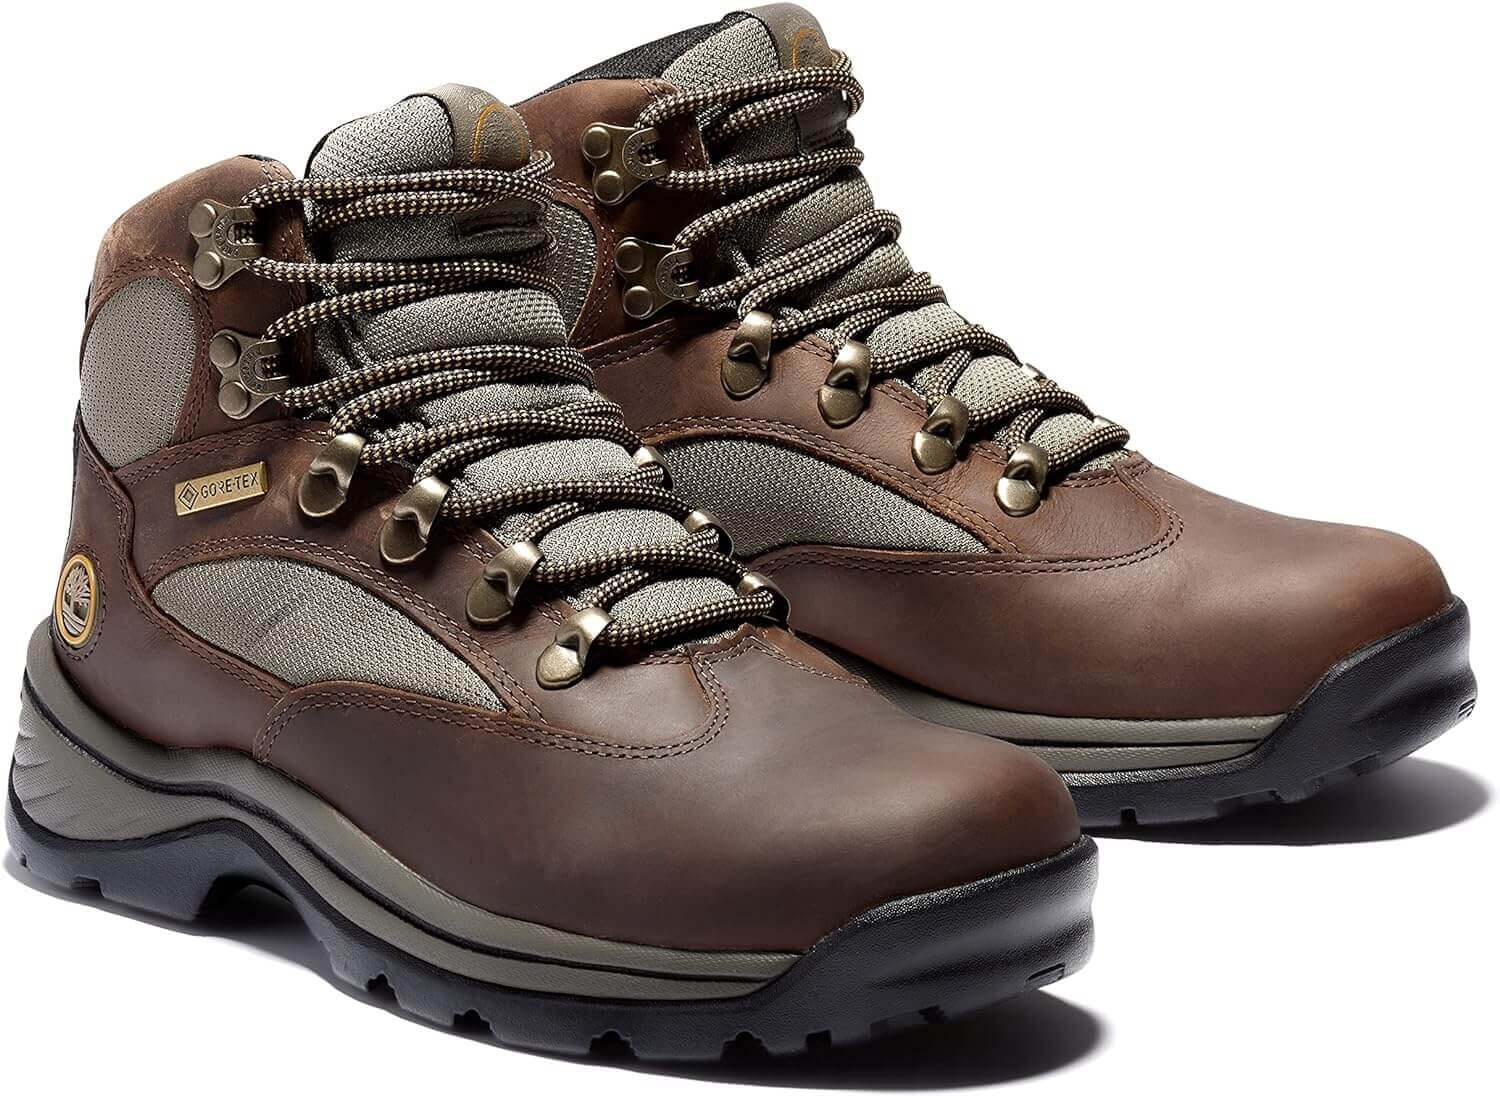 Shop The Latest >Timberland Women's Chocorua Trail Boot > *Only $158.57*> From The Top Brand > *Timberlandl* > Shop Now and Get Free Shipping On Orders Over $45.00 >*Shop Earth Foot*